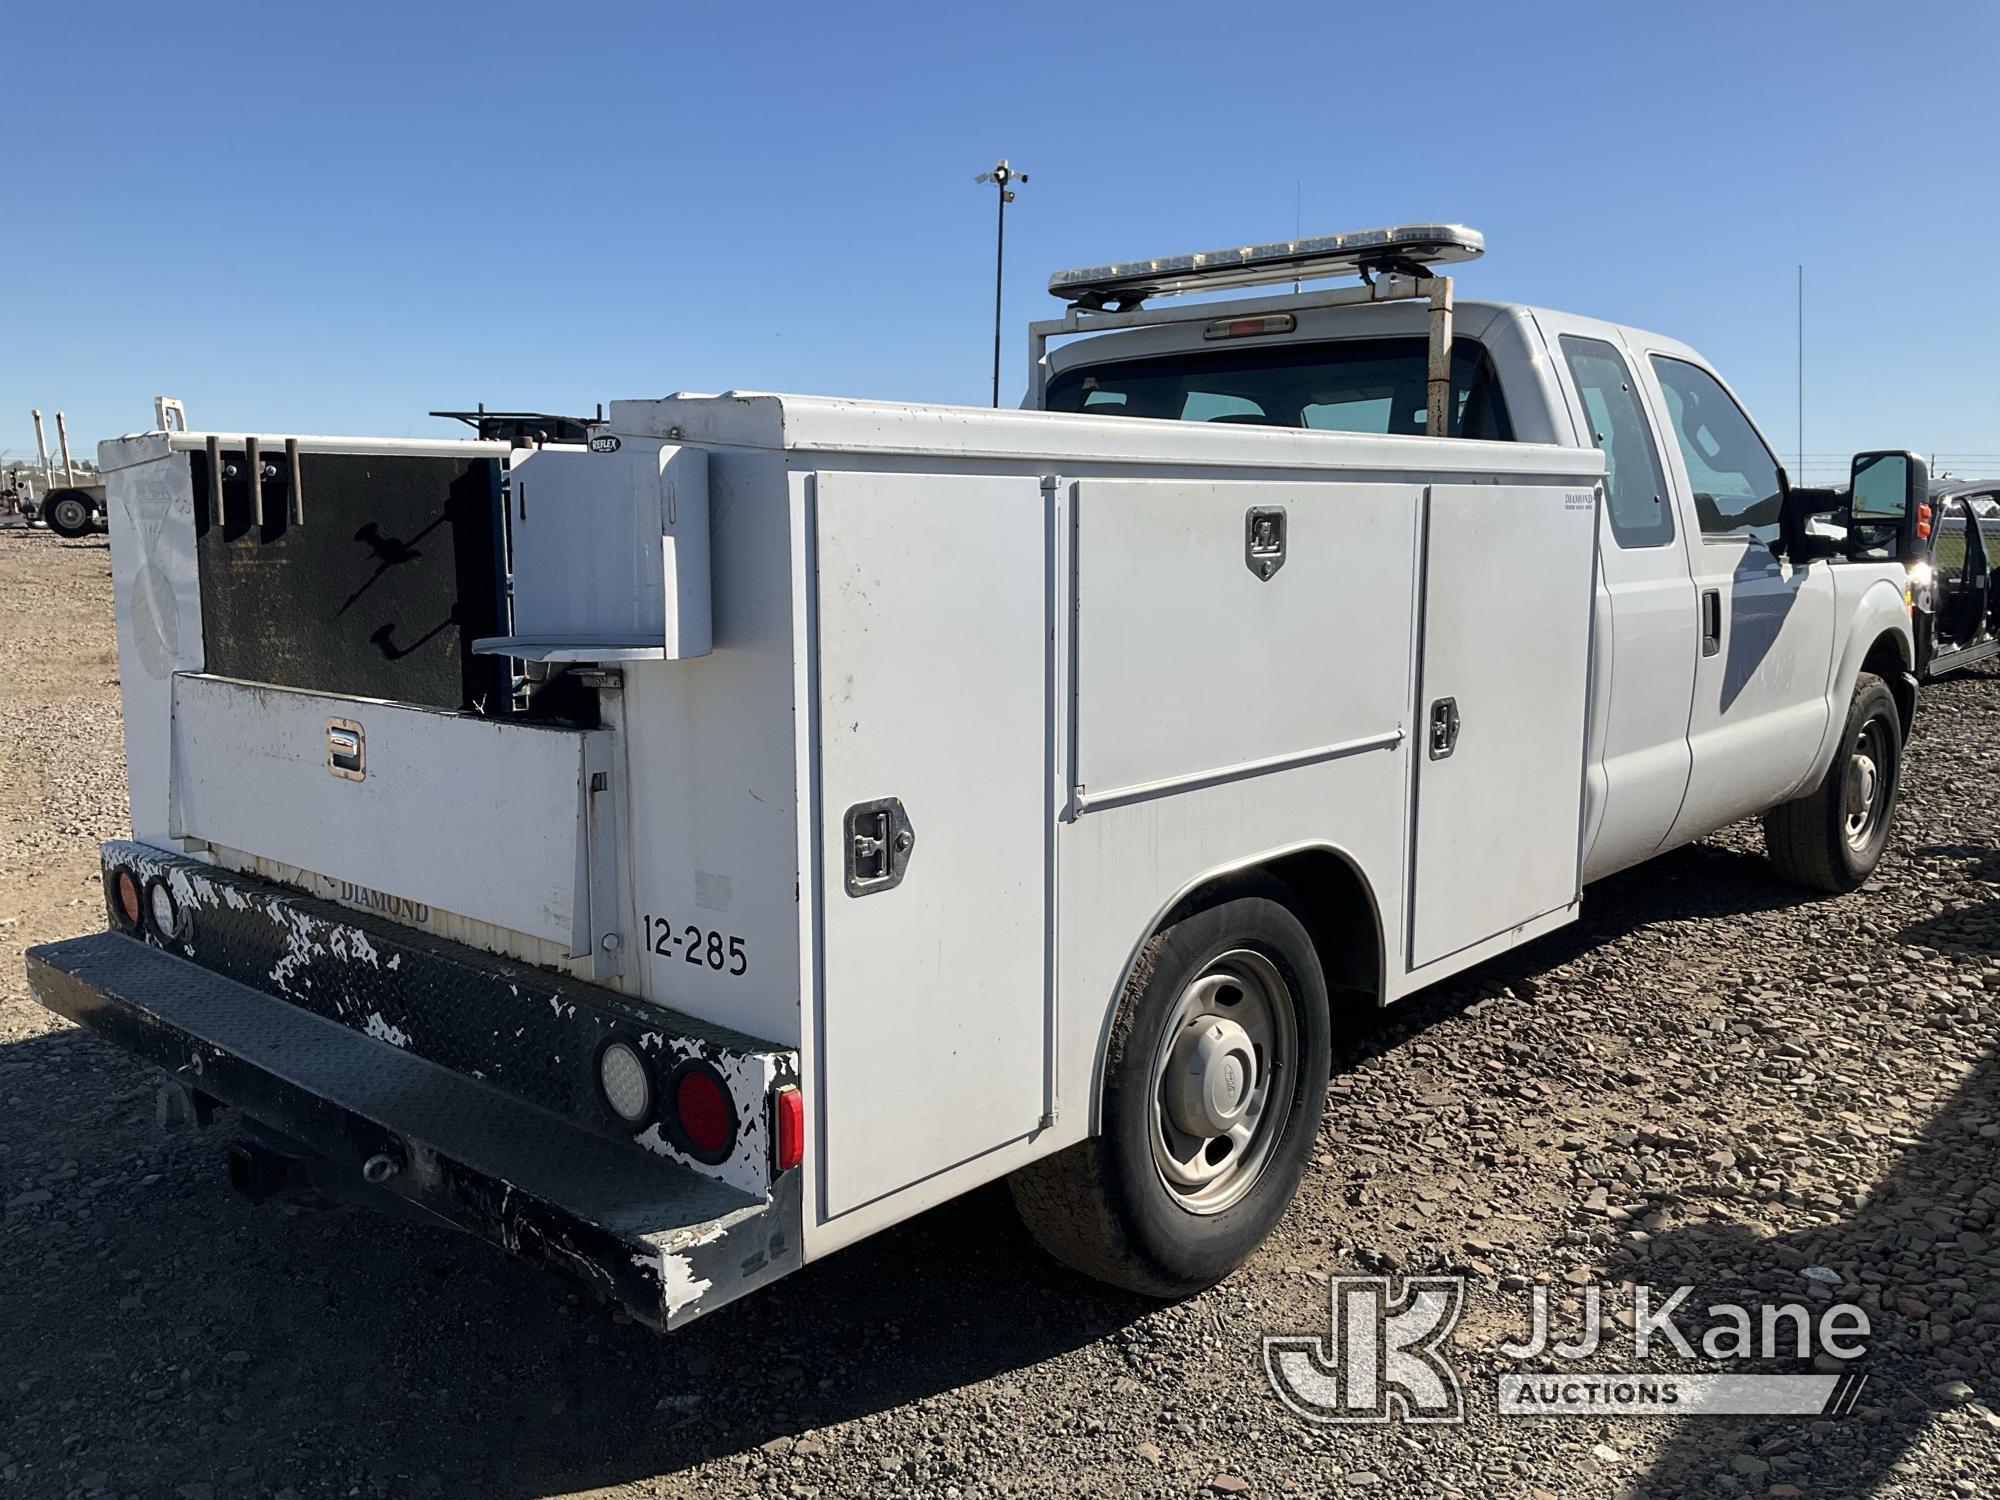 (Dixon, CA) 2012 Ford F250 Service Truck Non Running, Cranks Does Not Start, No Key